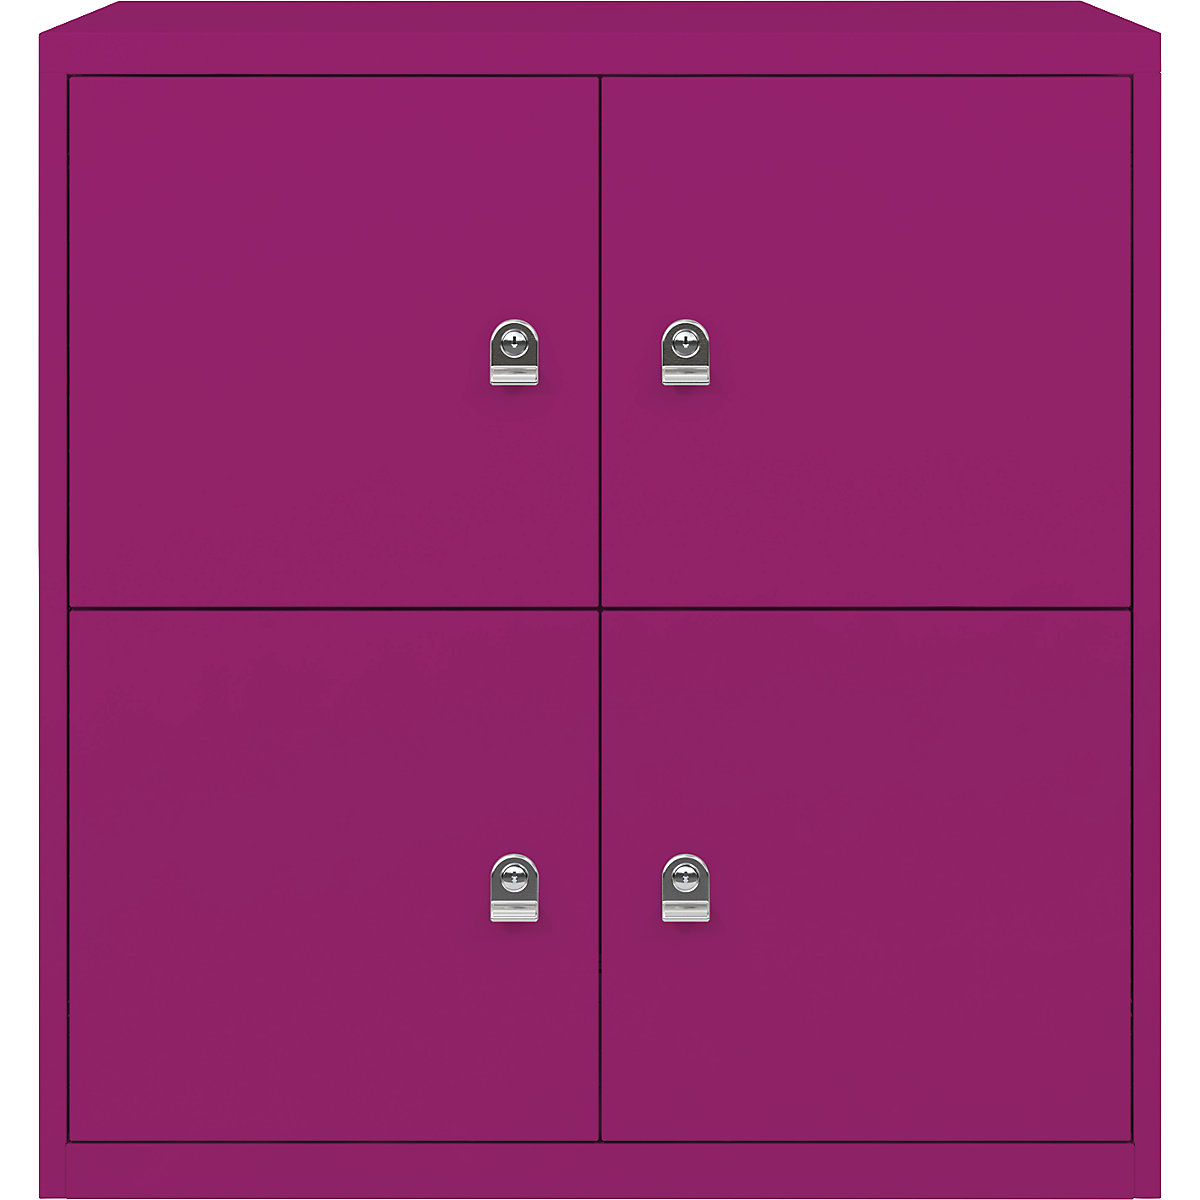 LateralFile™ lodge – BISLEY, with 4 lockable compartments, height 375 mm each, fuchsia